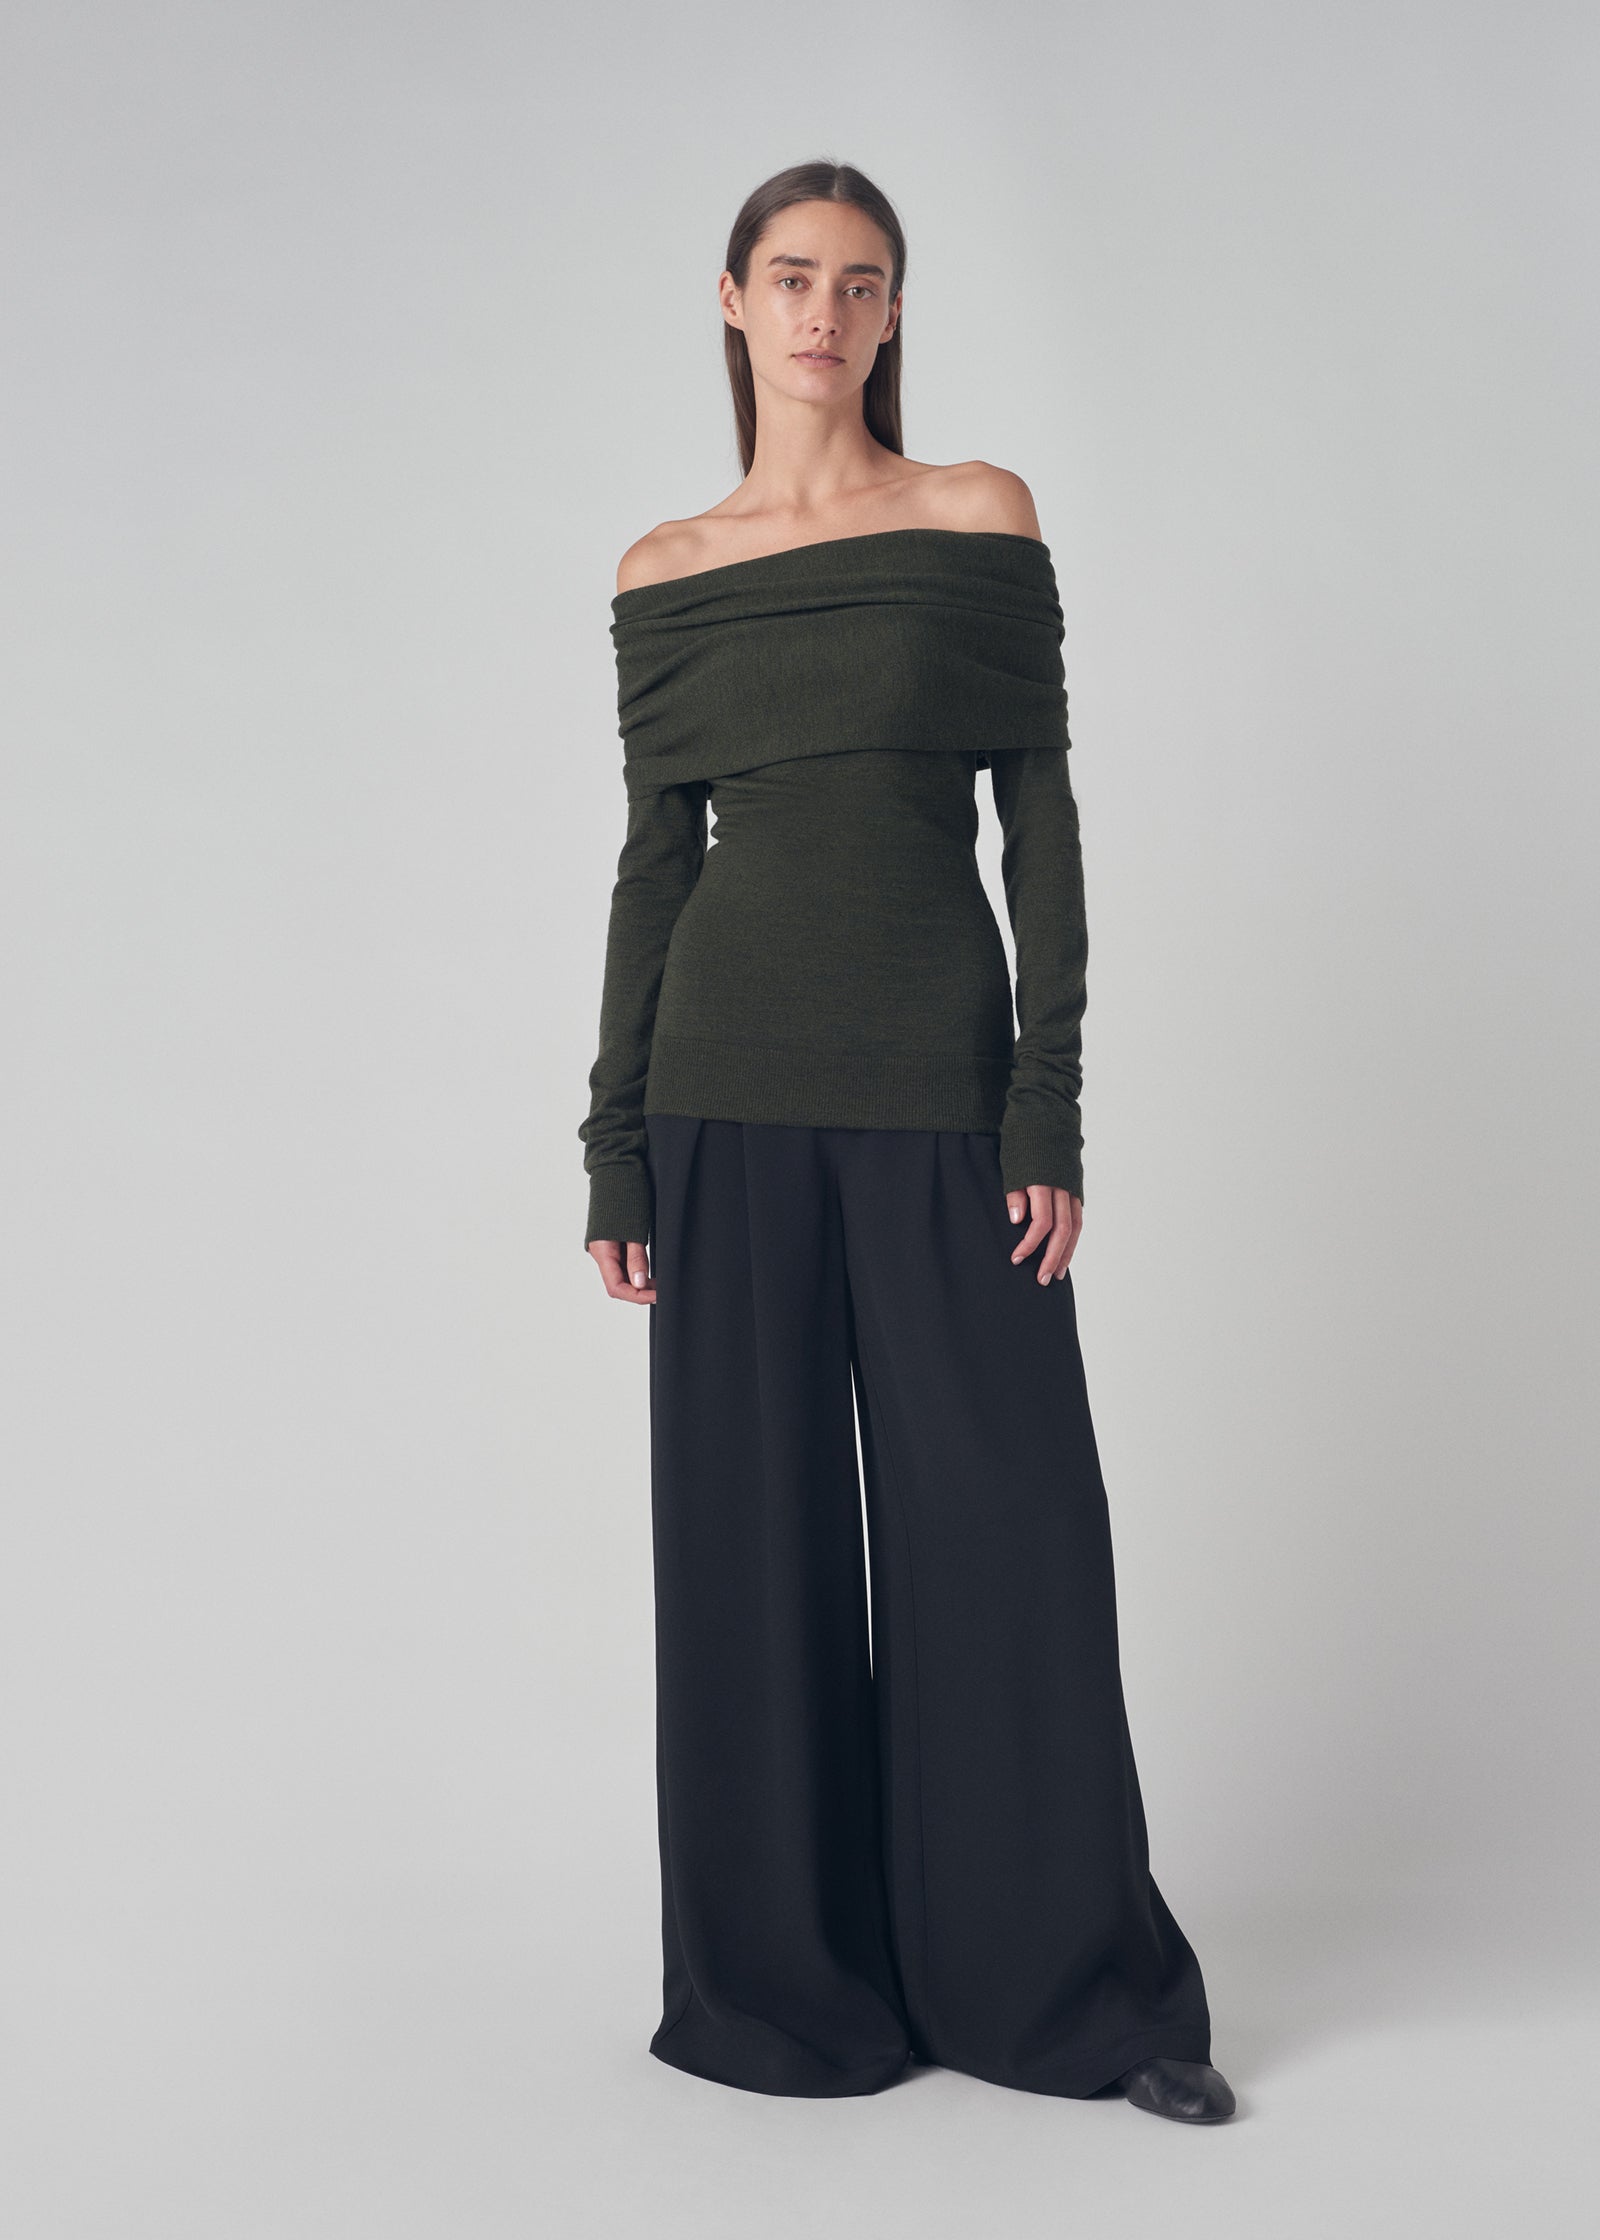 Off Shoulder Sweater in Fine Merino  - Green - CO Collections